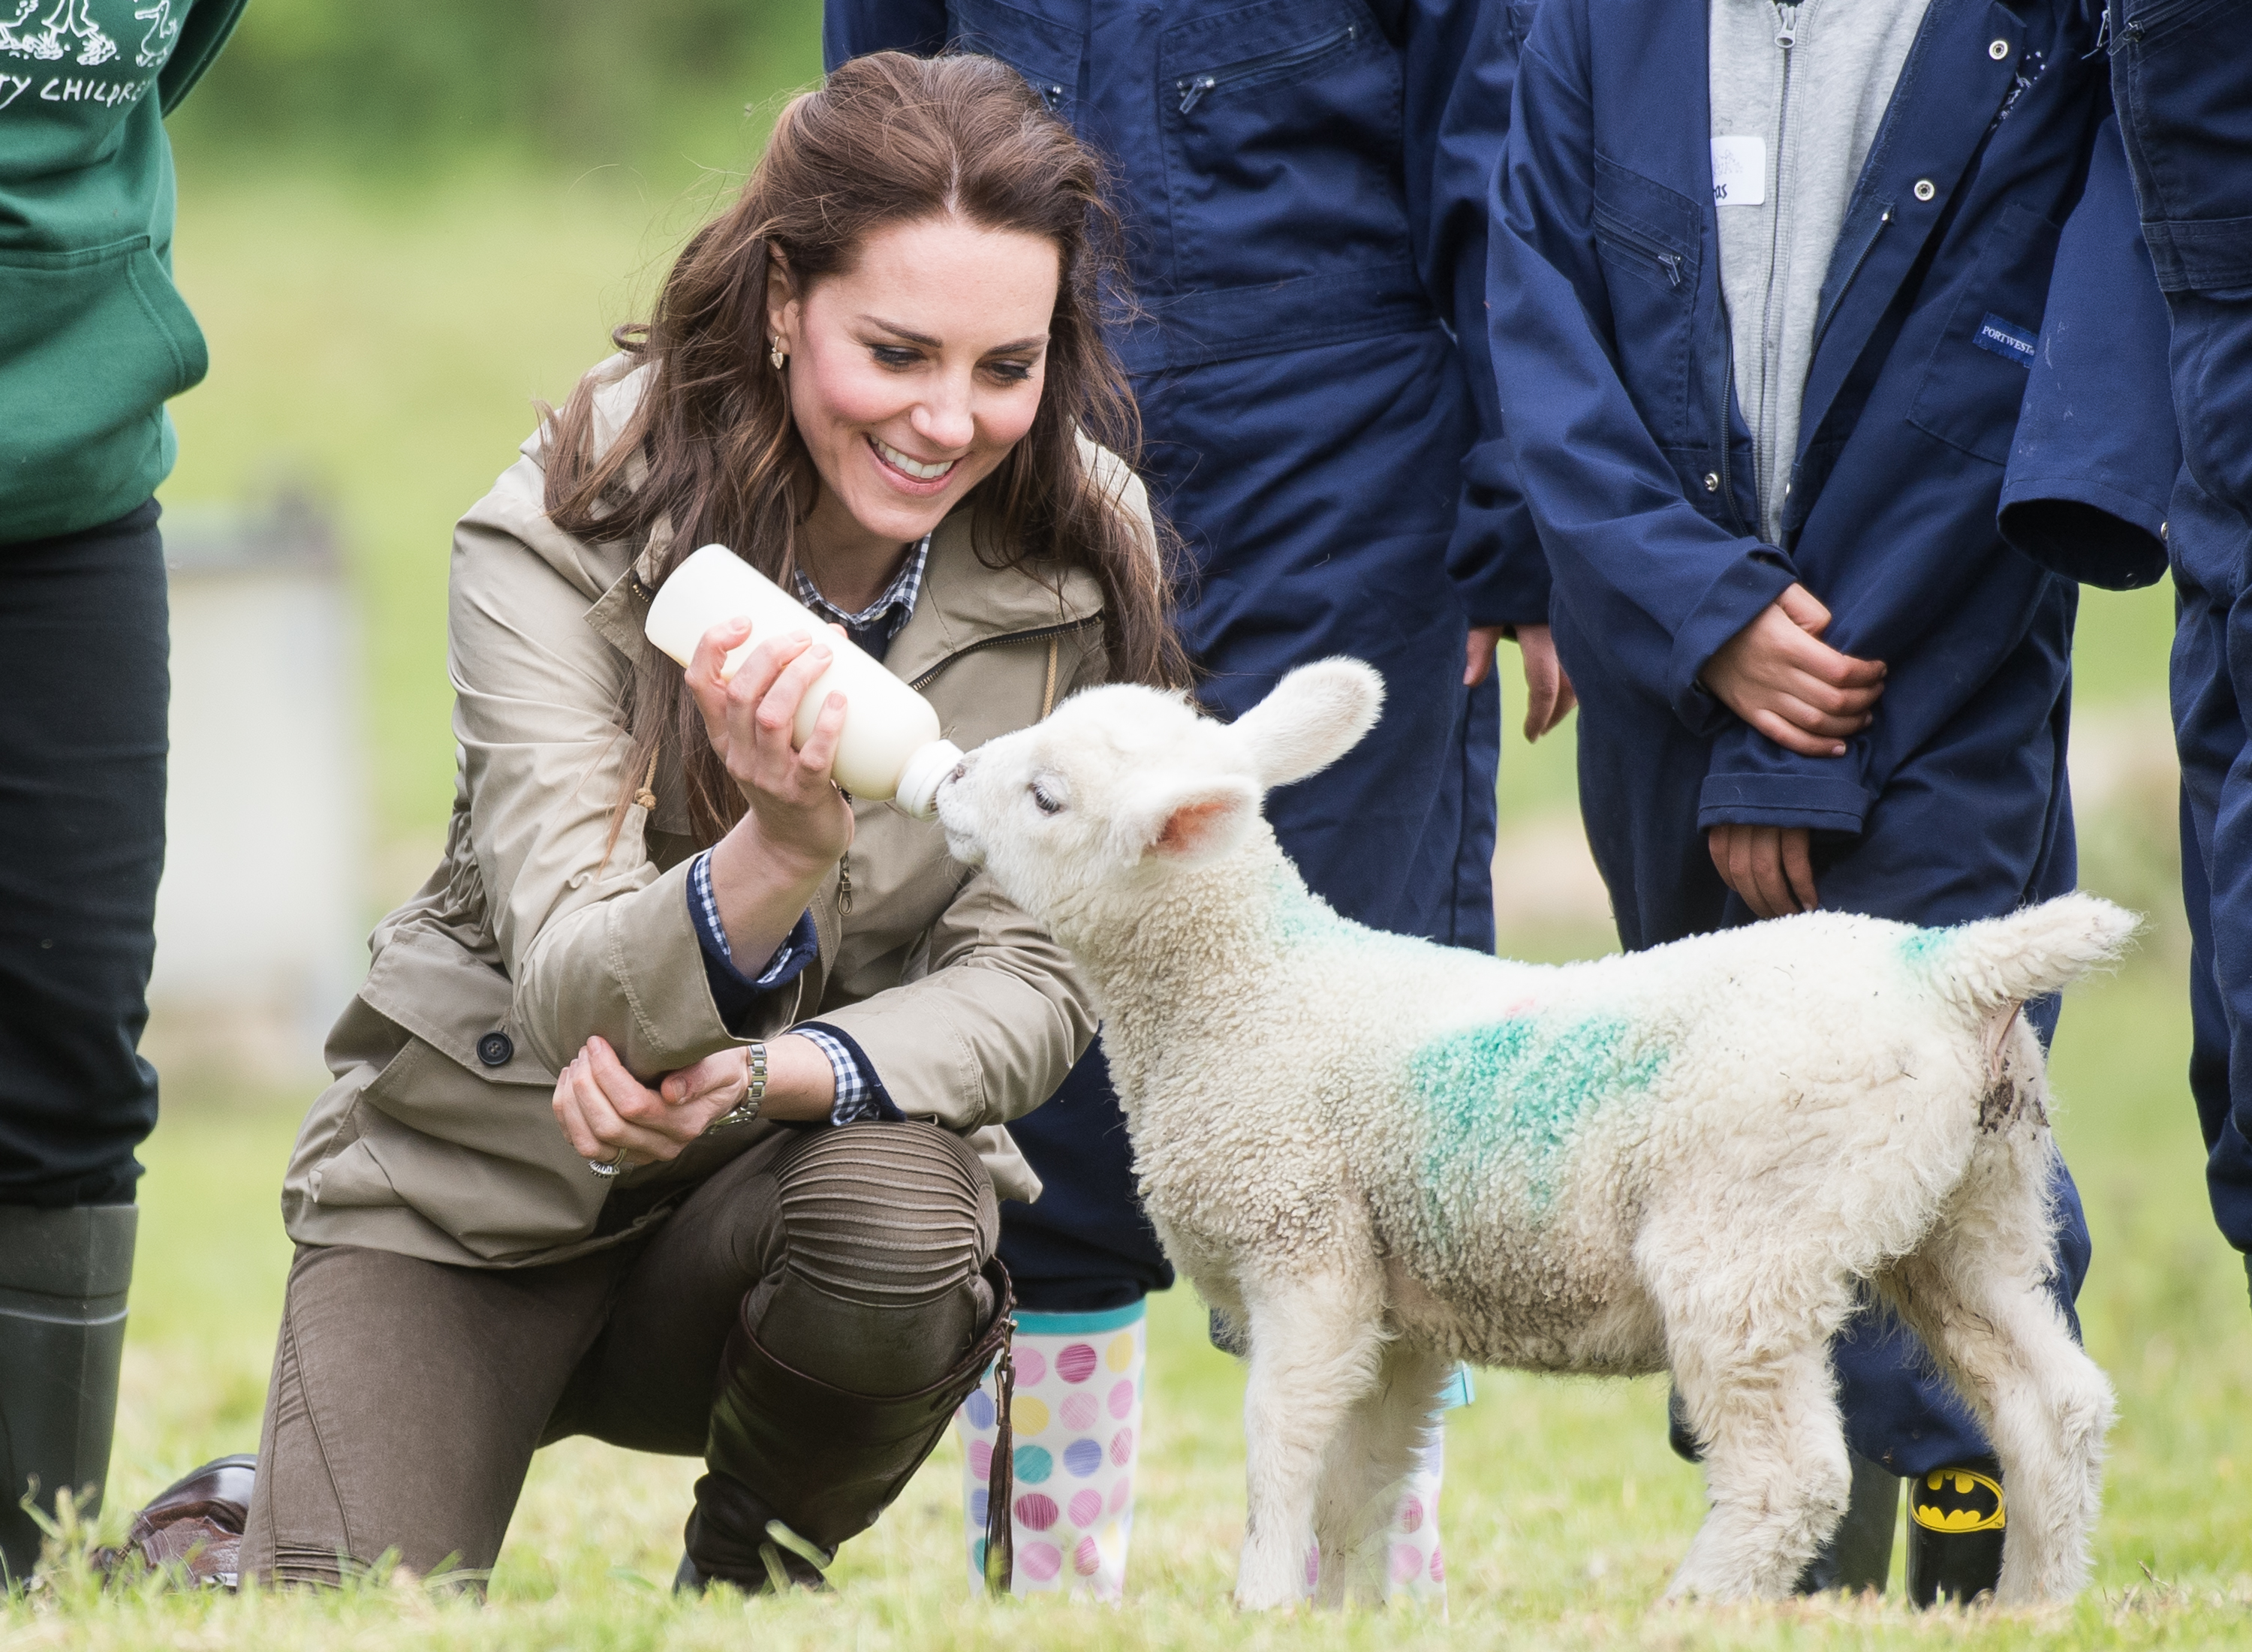 Catherine, Duchess of Cambridge feeds a lamb as she visits Farms for City Children in Arlingham, Gloucestershire, on May 3, 2017. | Source: Getty Images